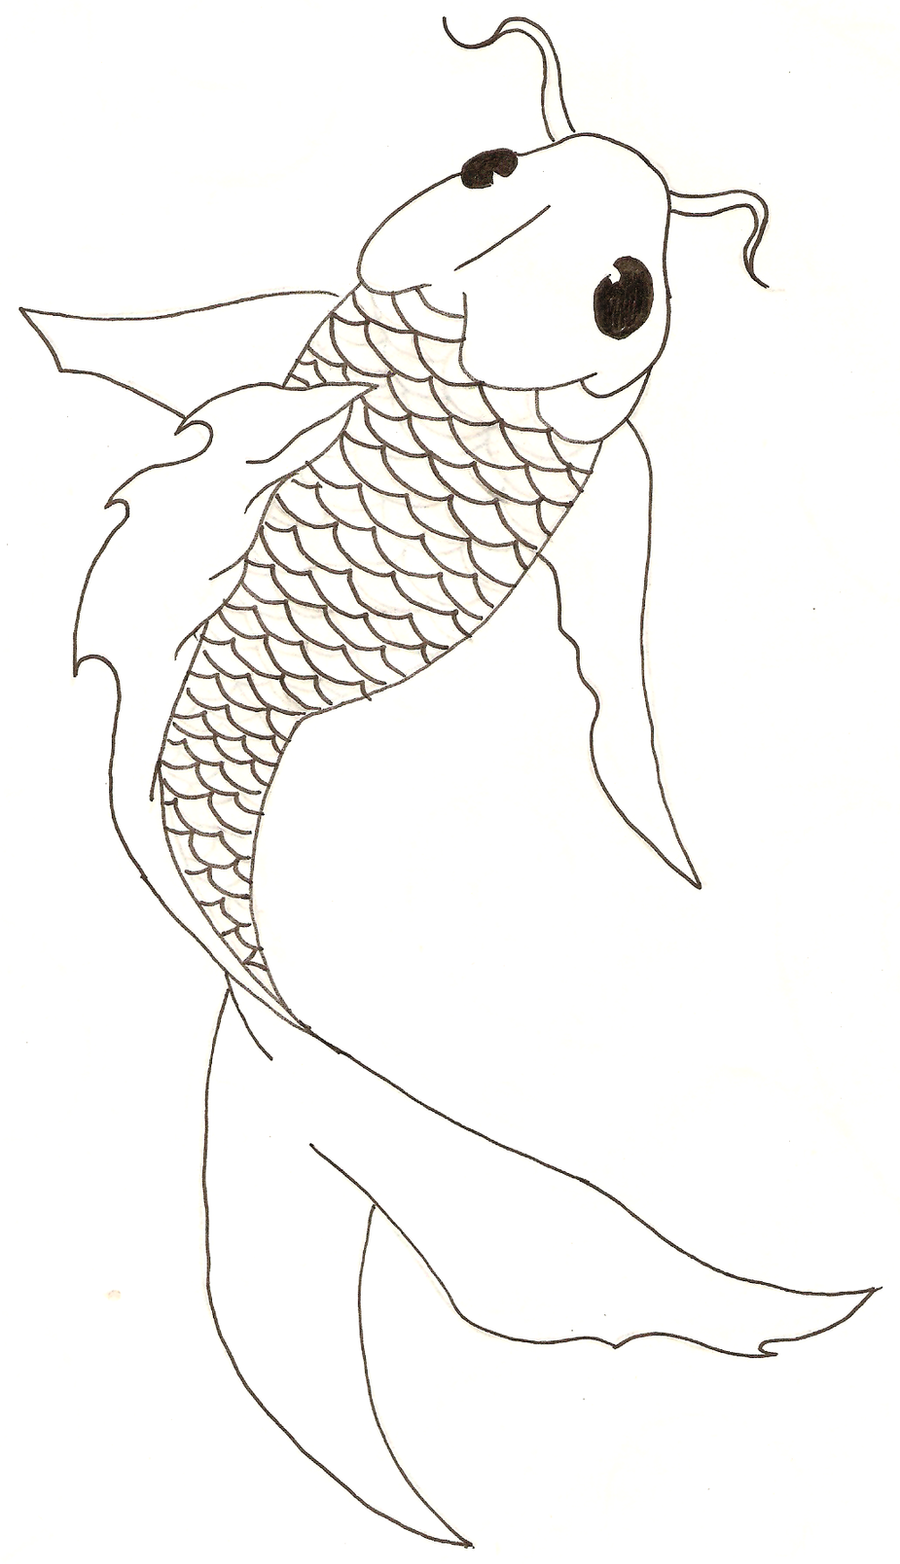 Koi Fish Lineart by titovn on